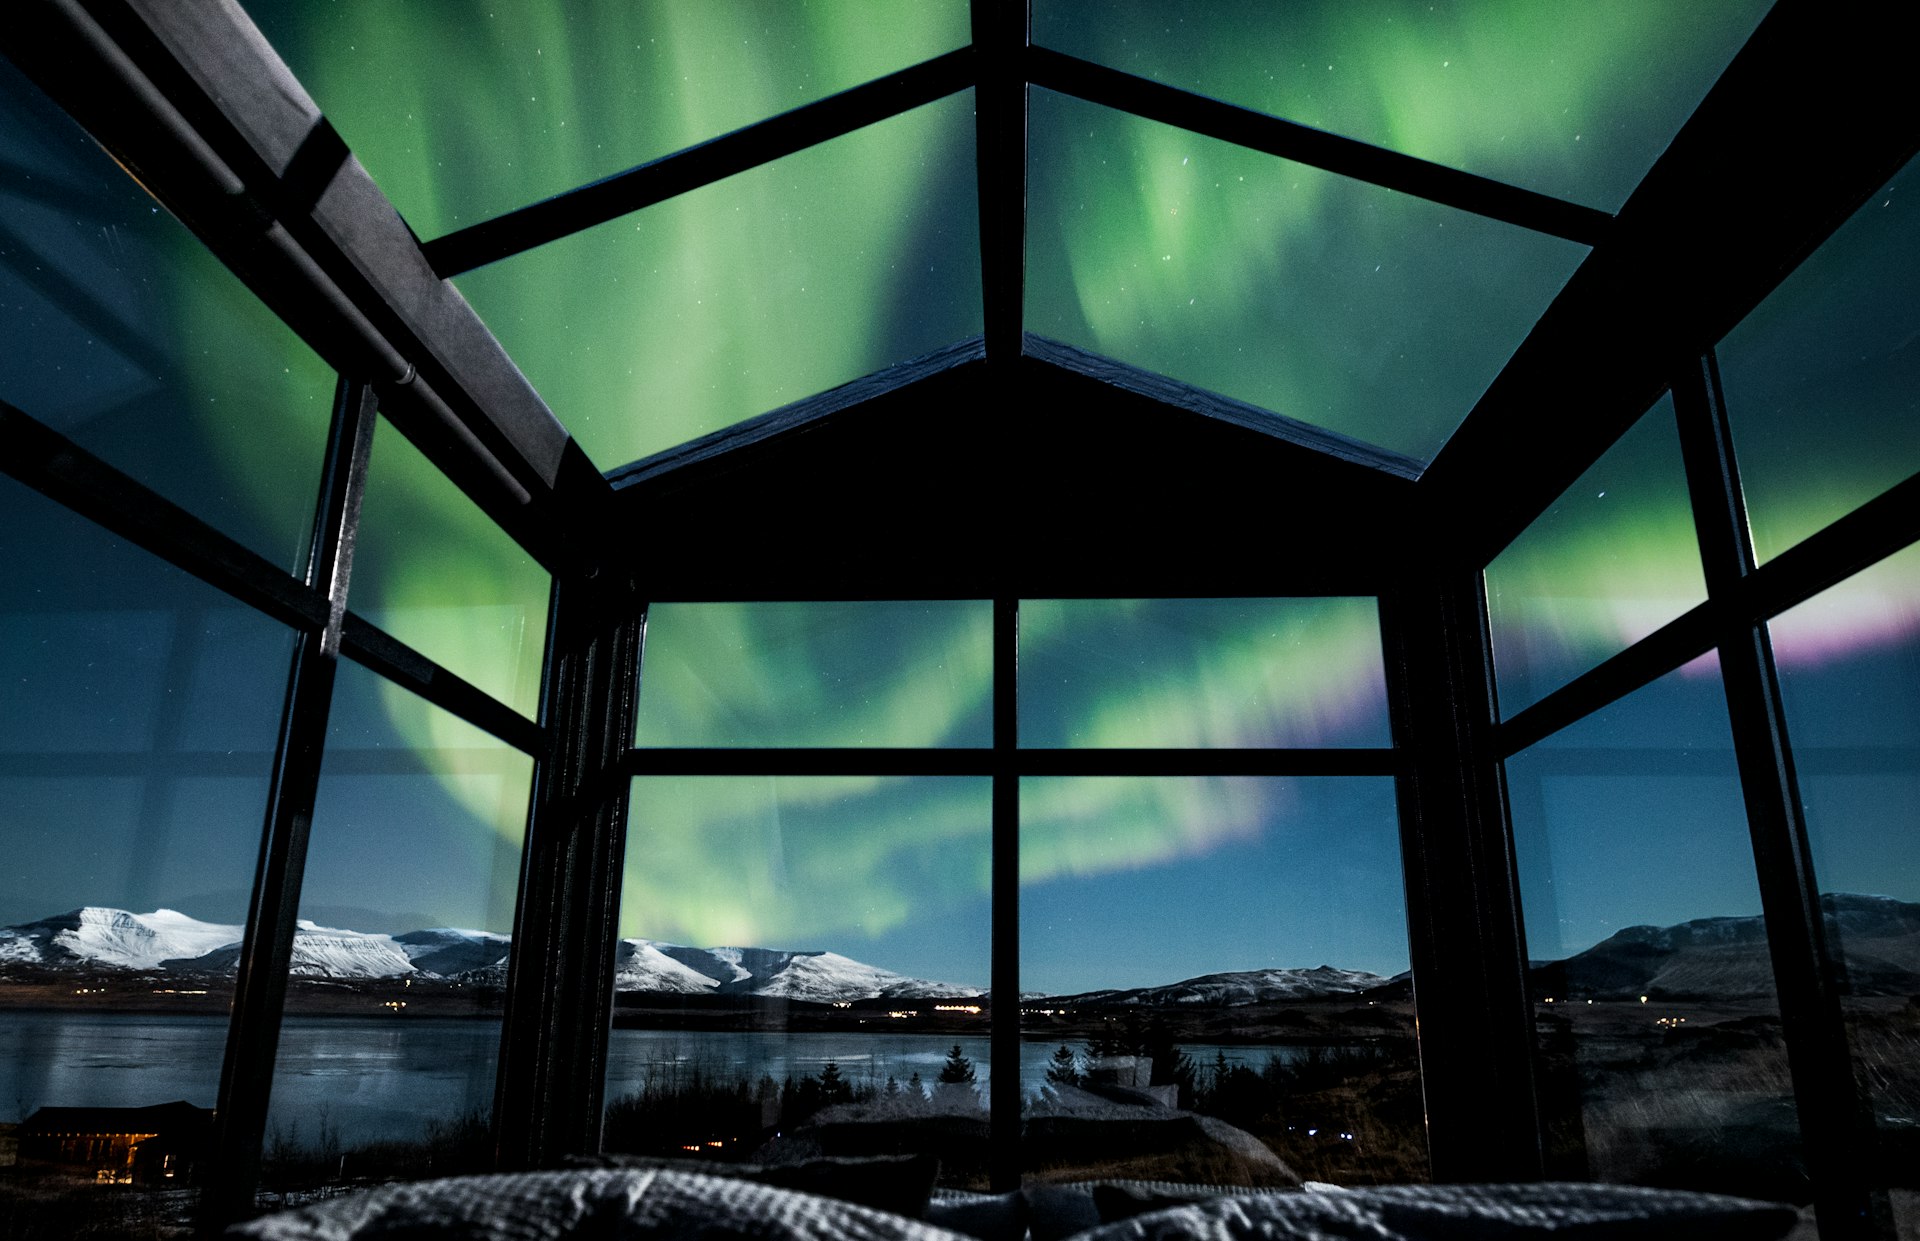 A picture of the Northern Lights through the glass ceiling of the cabin